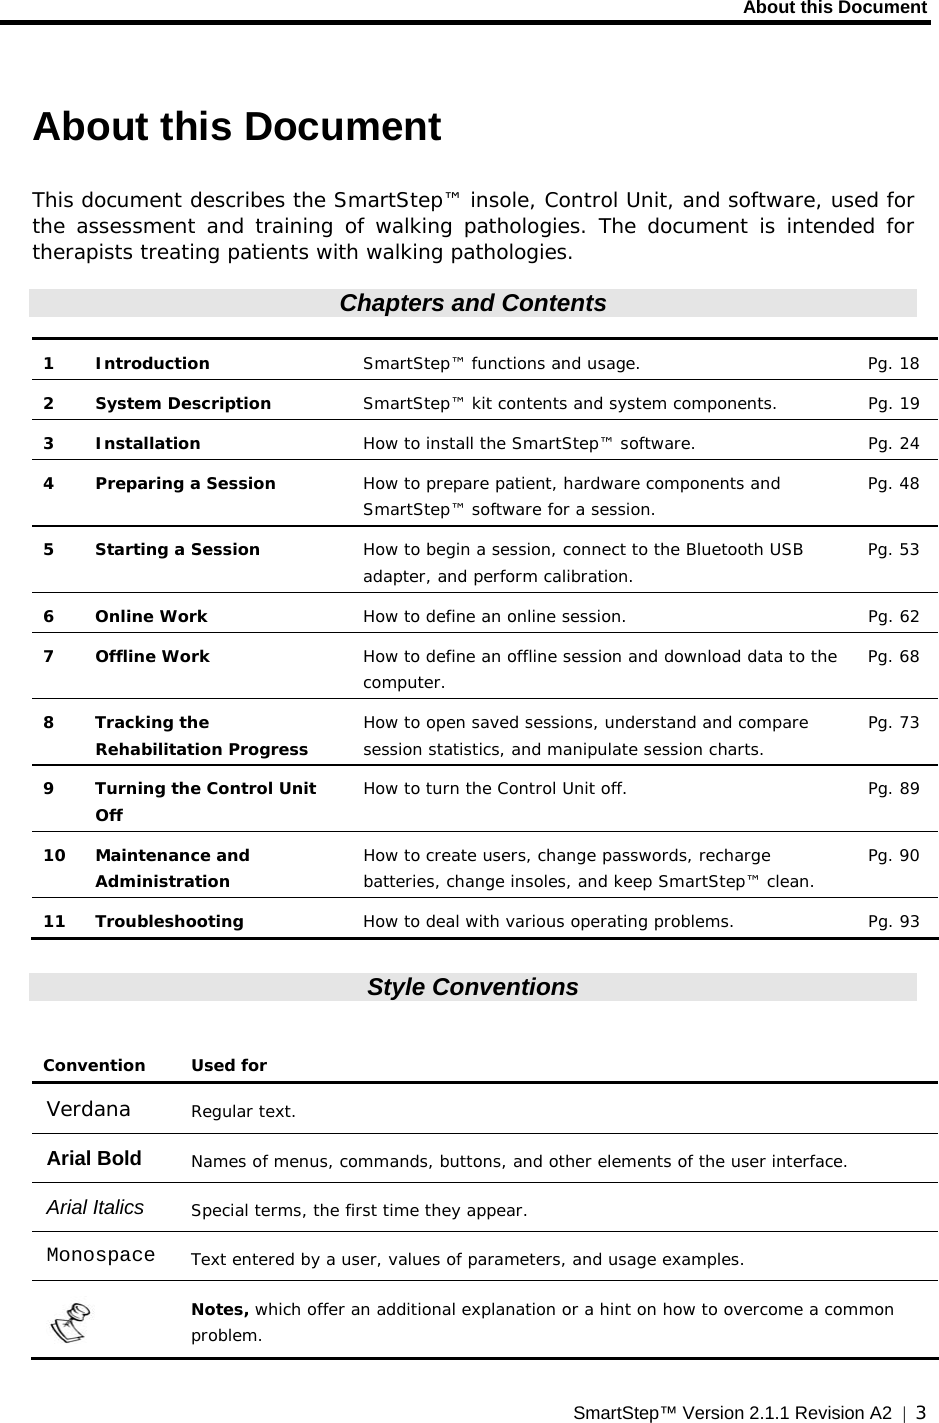     About this Document  SmartStep™ Version 2.1.1 Revision A2  |  3  About this Document This document describes the SmartStep™ insole, Control Unit, and software, used for the assessment and training of walking pathologies. The document is intended for therapists treating patients with walking pathologies. Chapters and Contents  1 Introduction  SmartStep™ functions and usage.  Pg. 18  2  System Description   SmartStep™ kit contents and system components.  Pg. 19 3 Installation  How to install the SmartStep™ software.  Pg. 24 4 Preparing a Session  How to prepare patient, hardware components and SmartStep™ software for a session. Pg. 48 5  Starting a Session  How to begin a session, connect to the Bluetooth USB adapter, and perform calibration. Pg. 53 6 Online Work  How to define an online session.  Pg. 62 7 Offline Work  How to define an offline session and download data to the computer.   Pg. 68 8 Tracking the Rehabilitation Progress How to open saved sessions, understand and compare session statistics, and manipulate session charts. Pg. 73 9  Turning the Control Unit Off How to turn the Control Unit off.  Pg. 89 10 Maintenance and Administration How to create users, change passwords, recharge batteries, change insoles, and keep SmartStep™ clean. Pg. 90 11 Troubleshooting  How to deal with various operating problems.  Pg. 93  Style Conventions  Convention Used for Verdana  Regular text. Arial Bold  Names of menus, commands, buttons, and other elements of the user interface. Arial Italics  Special terms, the first time they appear. Monospace  Text entered by a user, values of parameters, and usage examples.  Notes, which offer an additional explanation or a hint on how to overcome a common problem. 